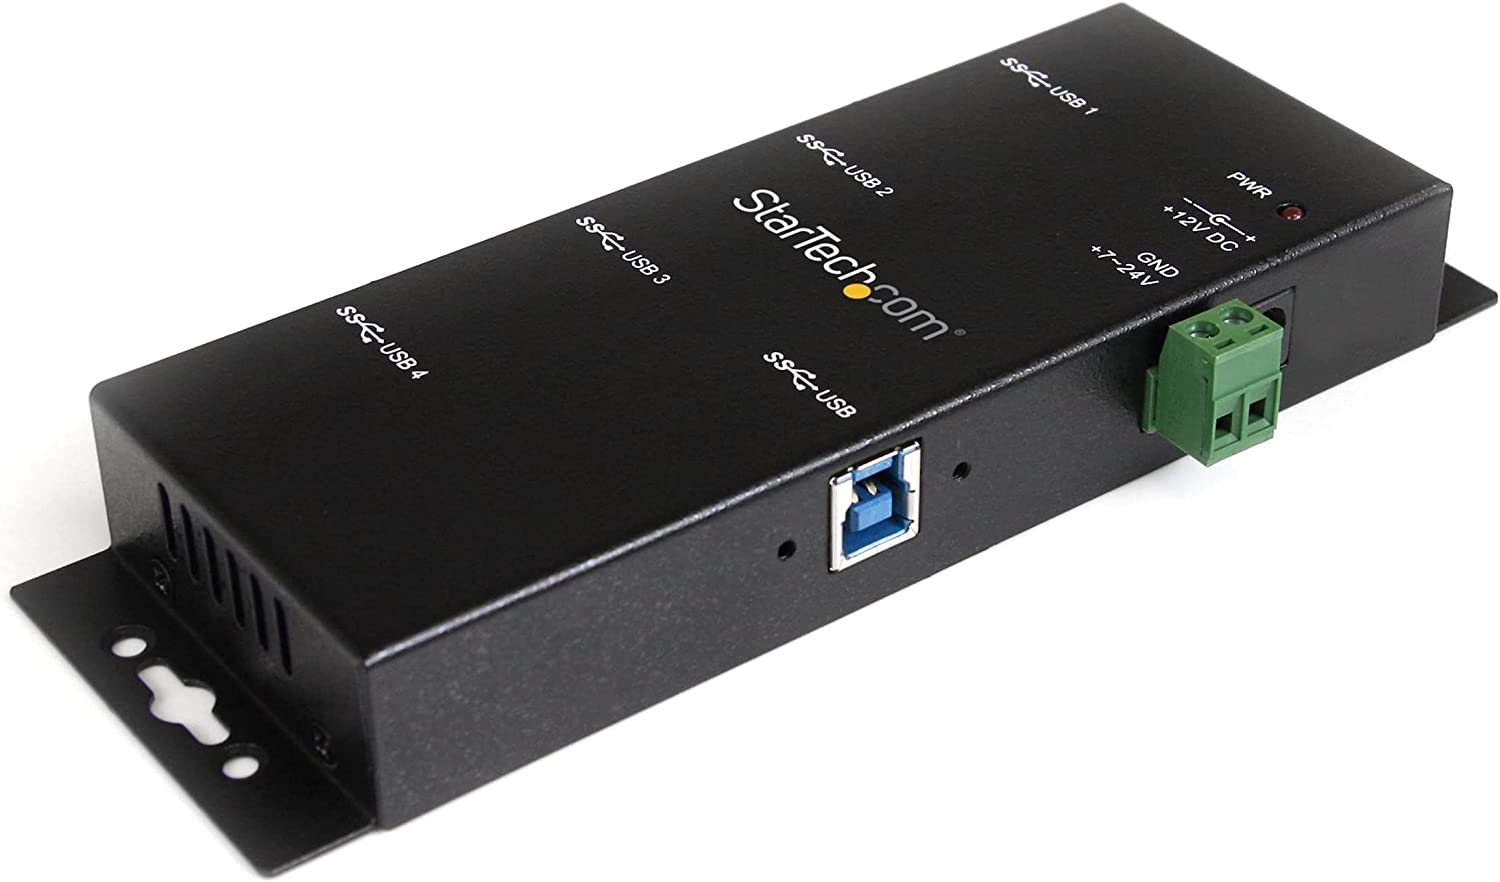 StarTech MOUNTABLE 4 PORT RUGGED INDUSTRIAL SUPERSPEED USB 3.0 HUB(ST4300USBM) - Win-Pro Consultancy Pte Ltd